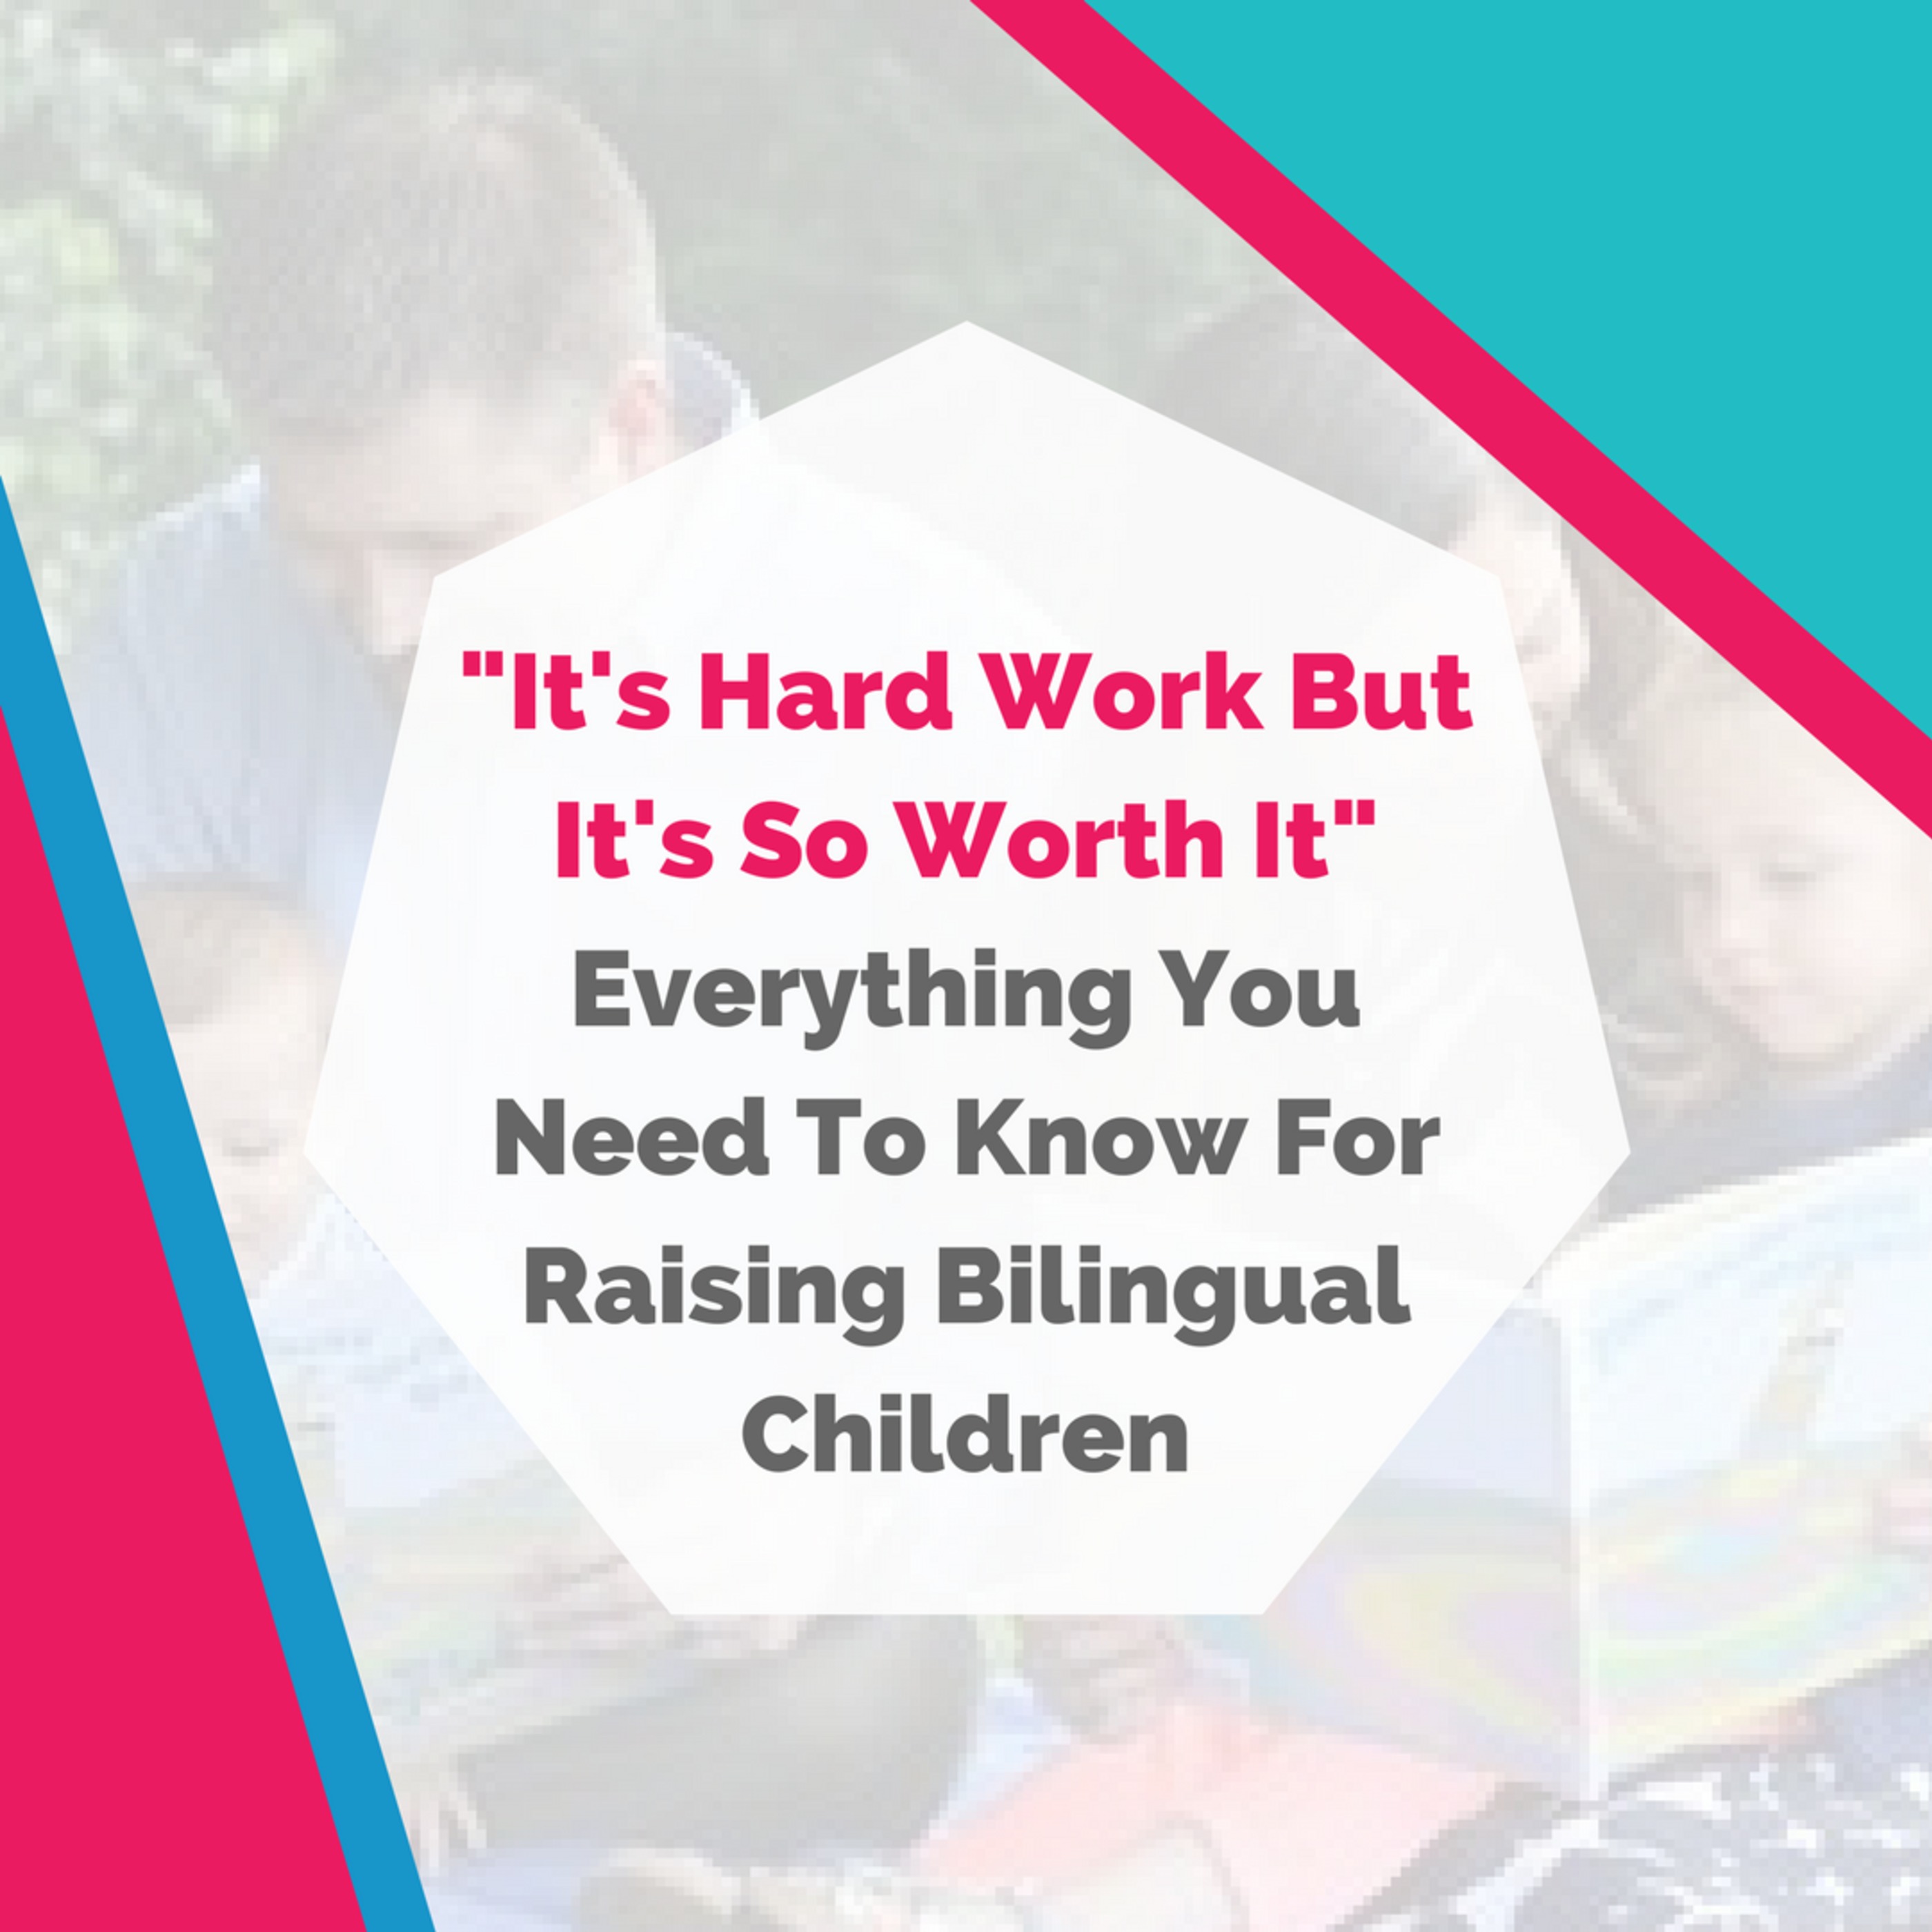 ”It’s Hard Work But It’s So Worth It”: Everything You Need To Know For Raising Bilingual Children